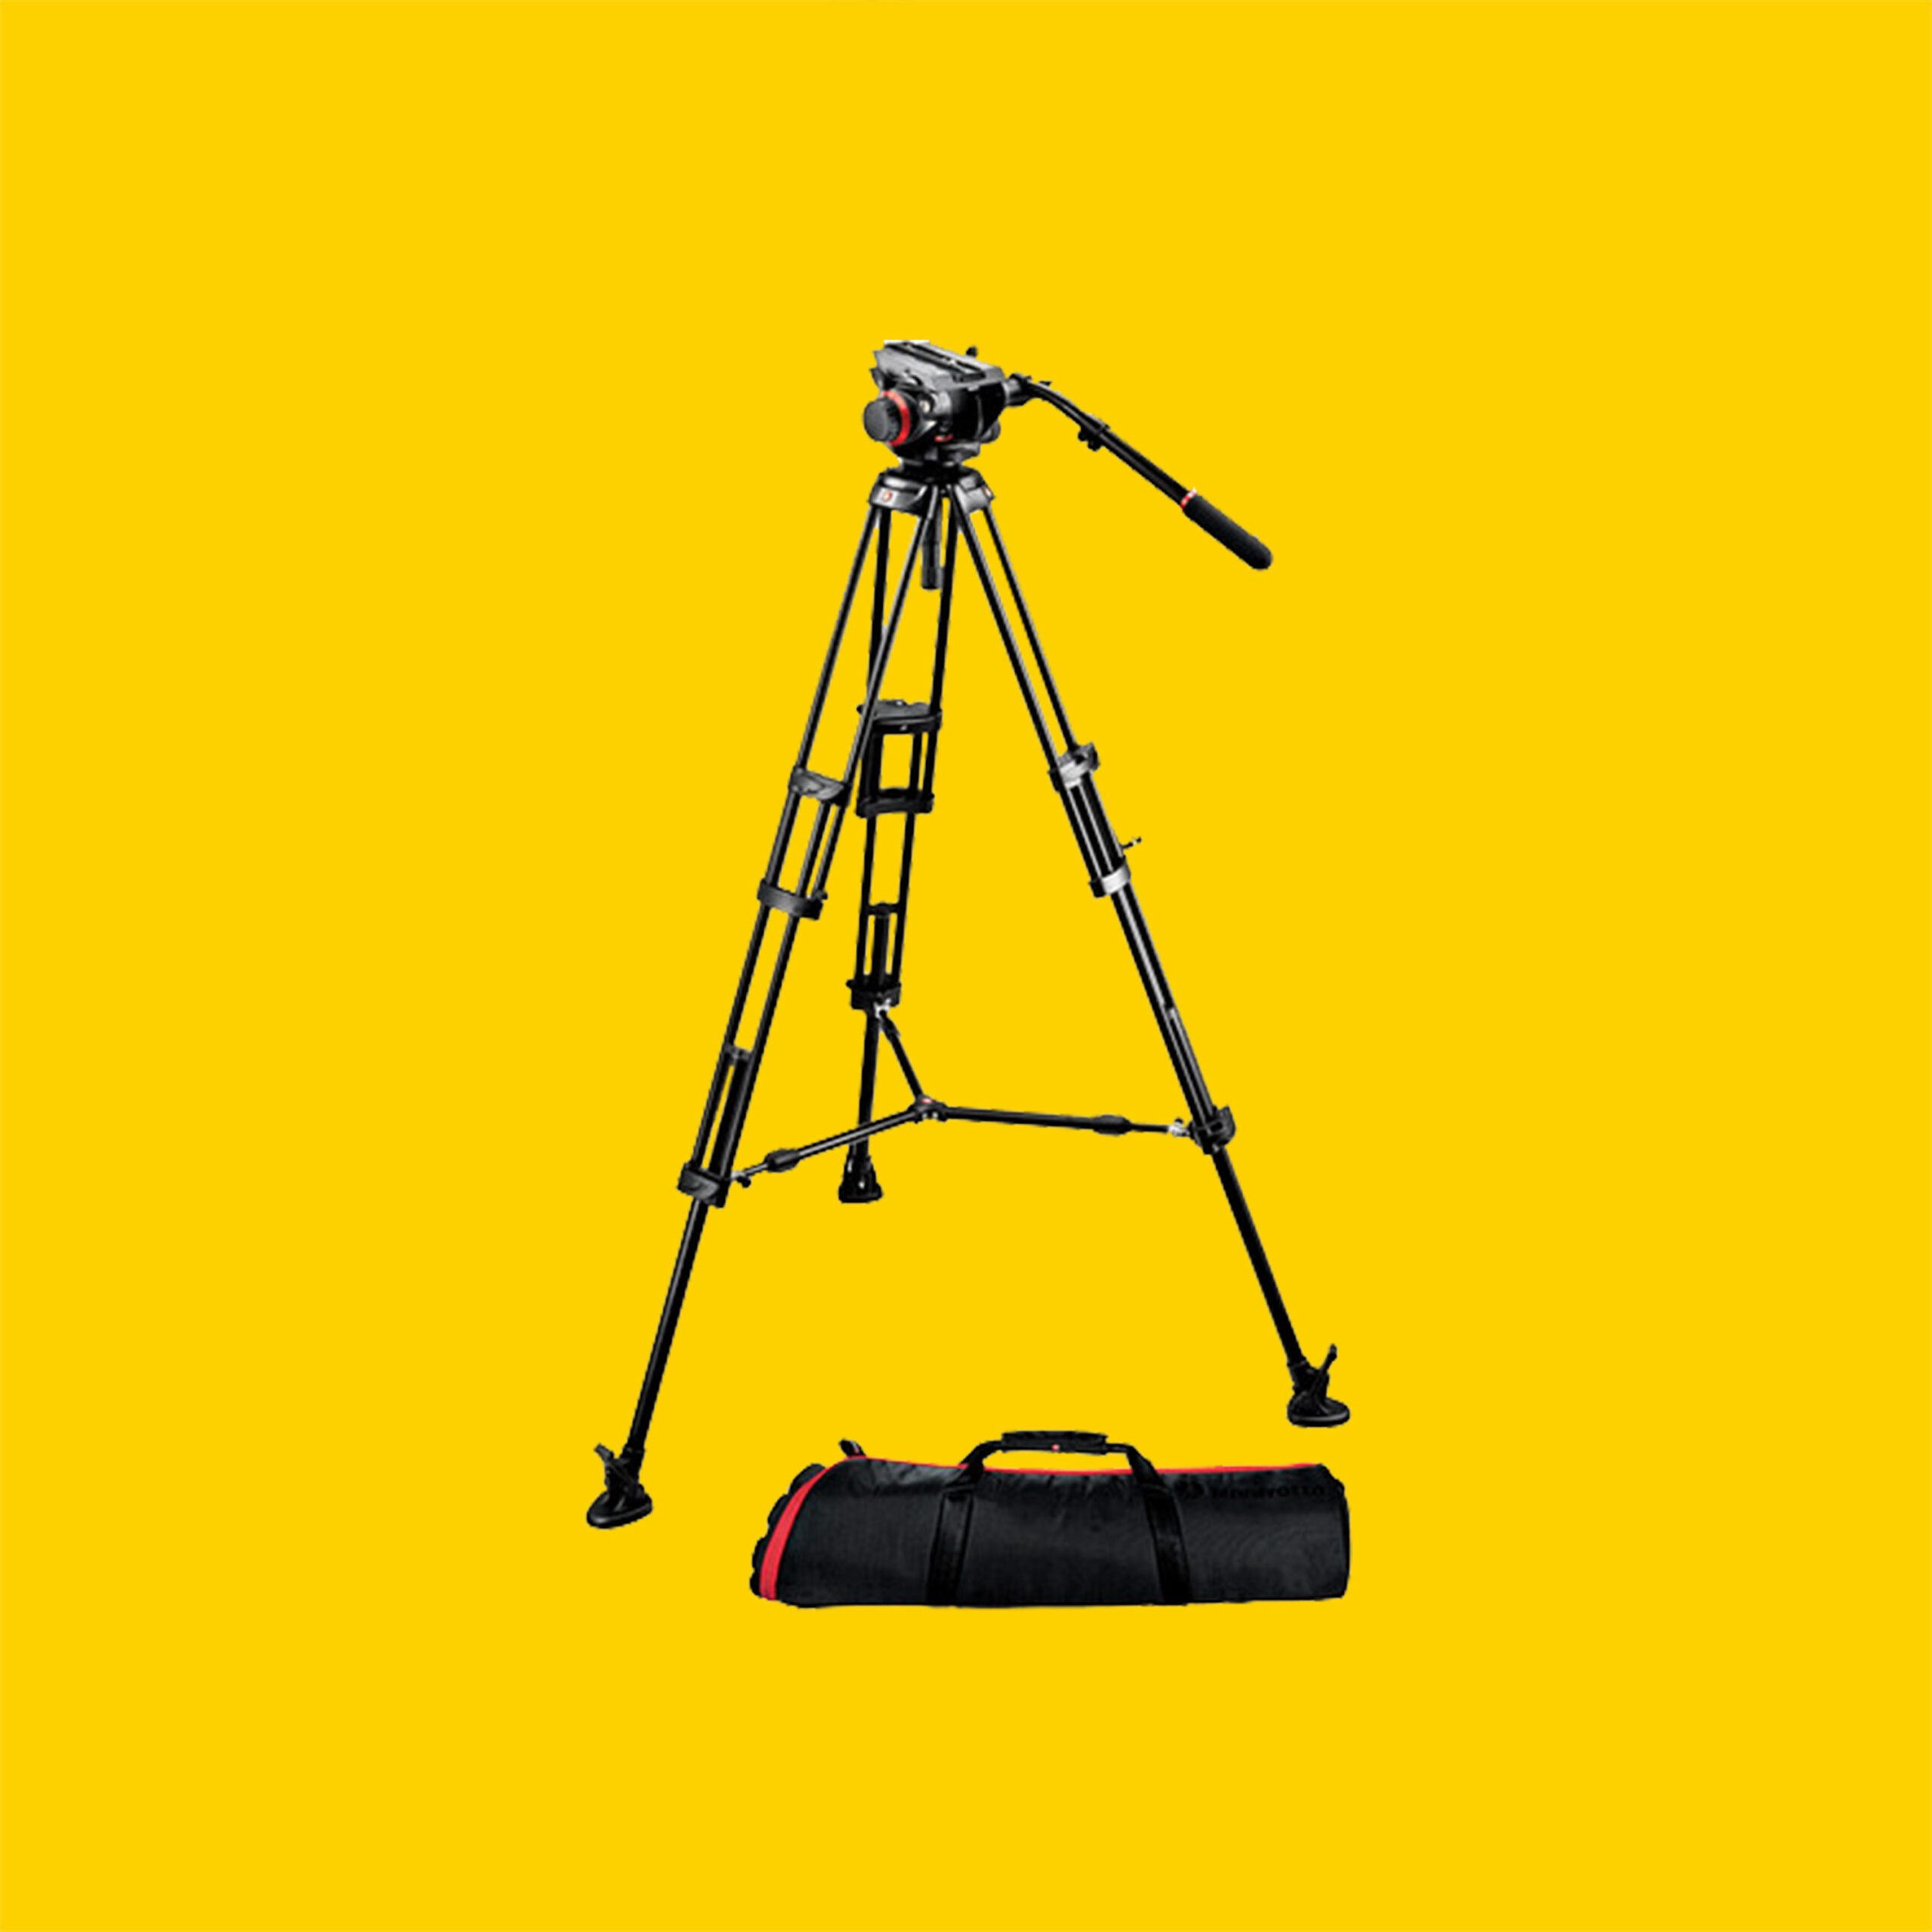 Manfrotto 504HD Tripod Package